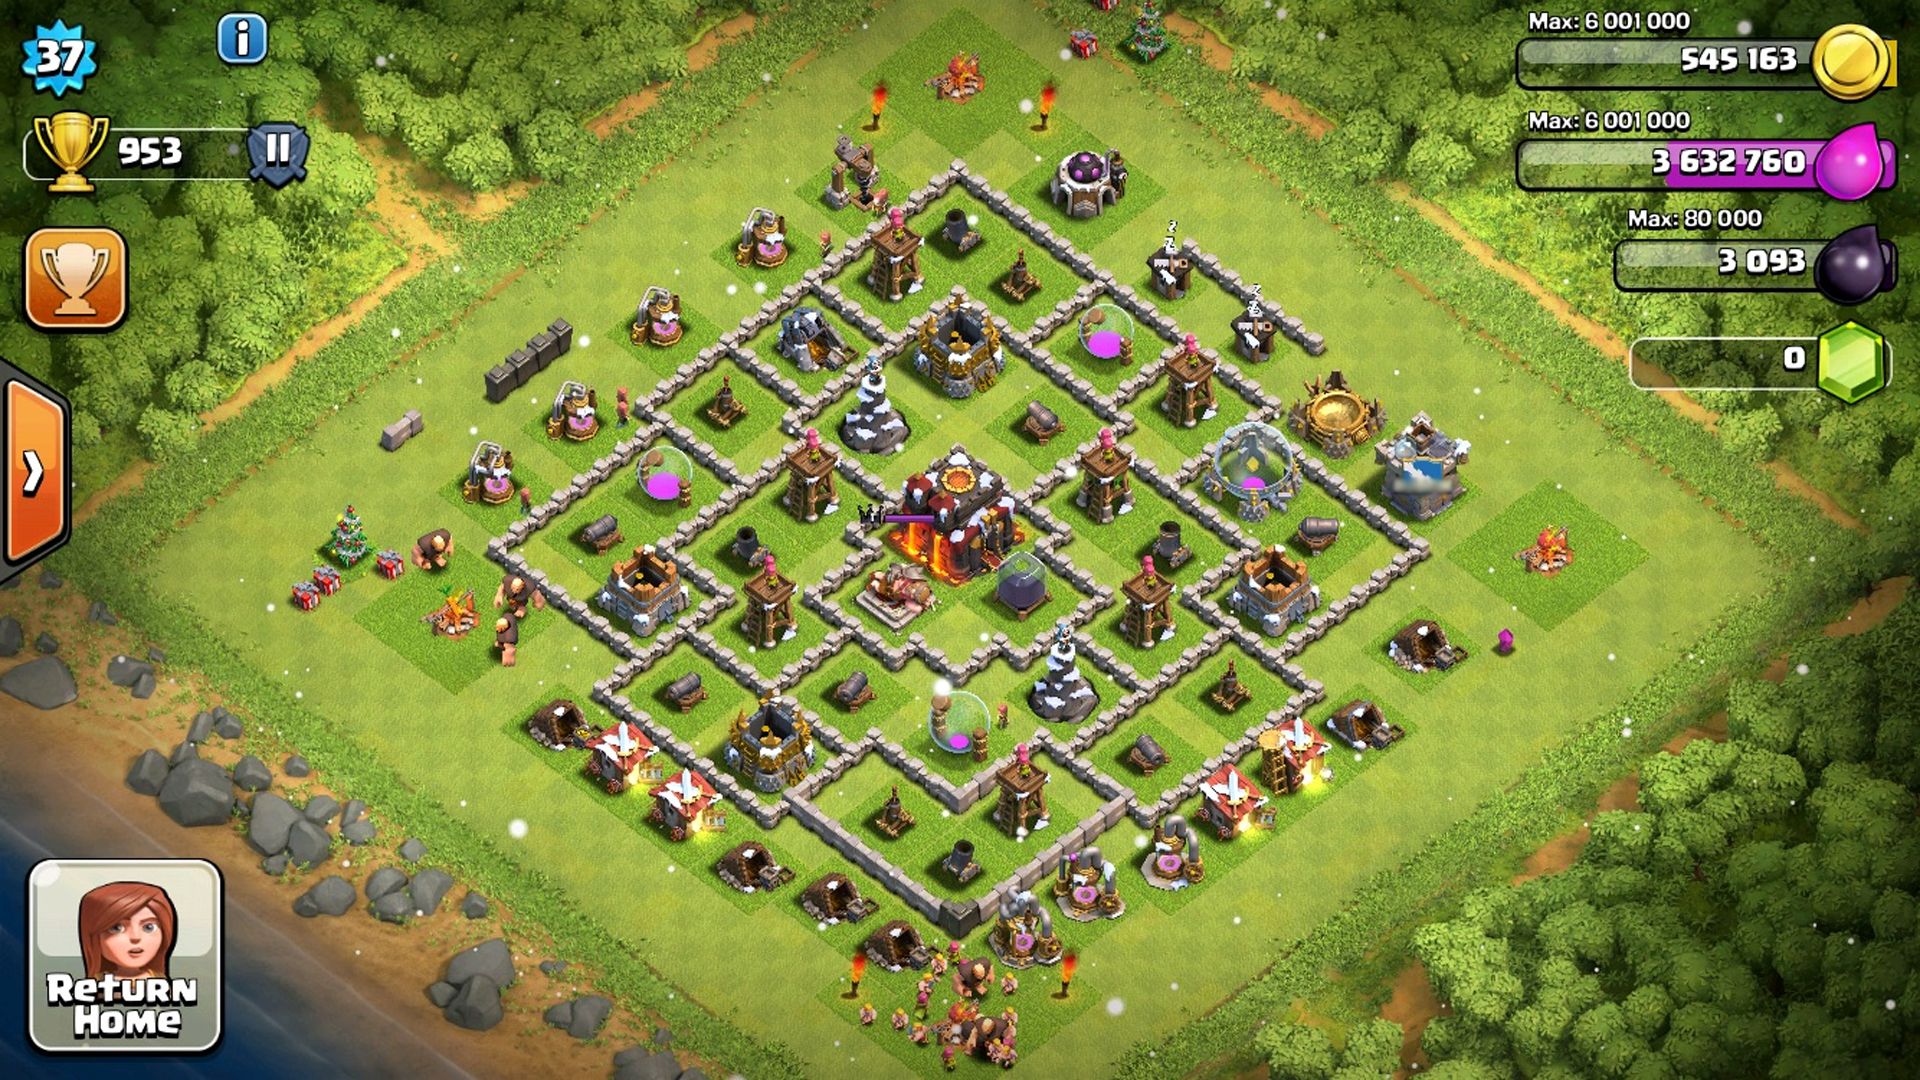 15 Ways To Dominate At Clash Of Clans